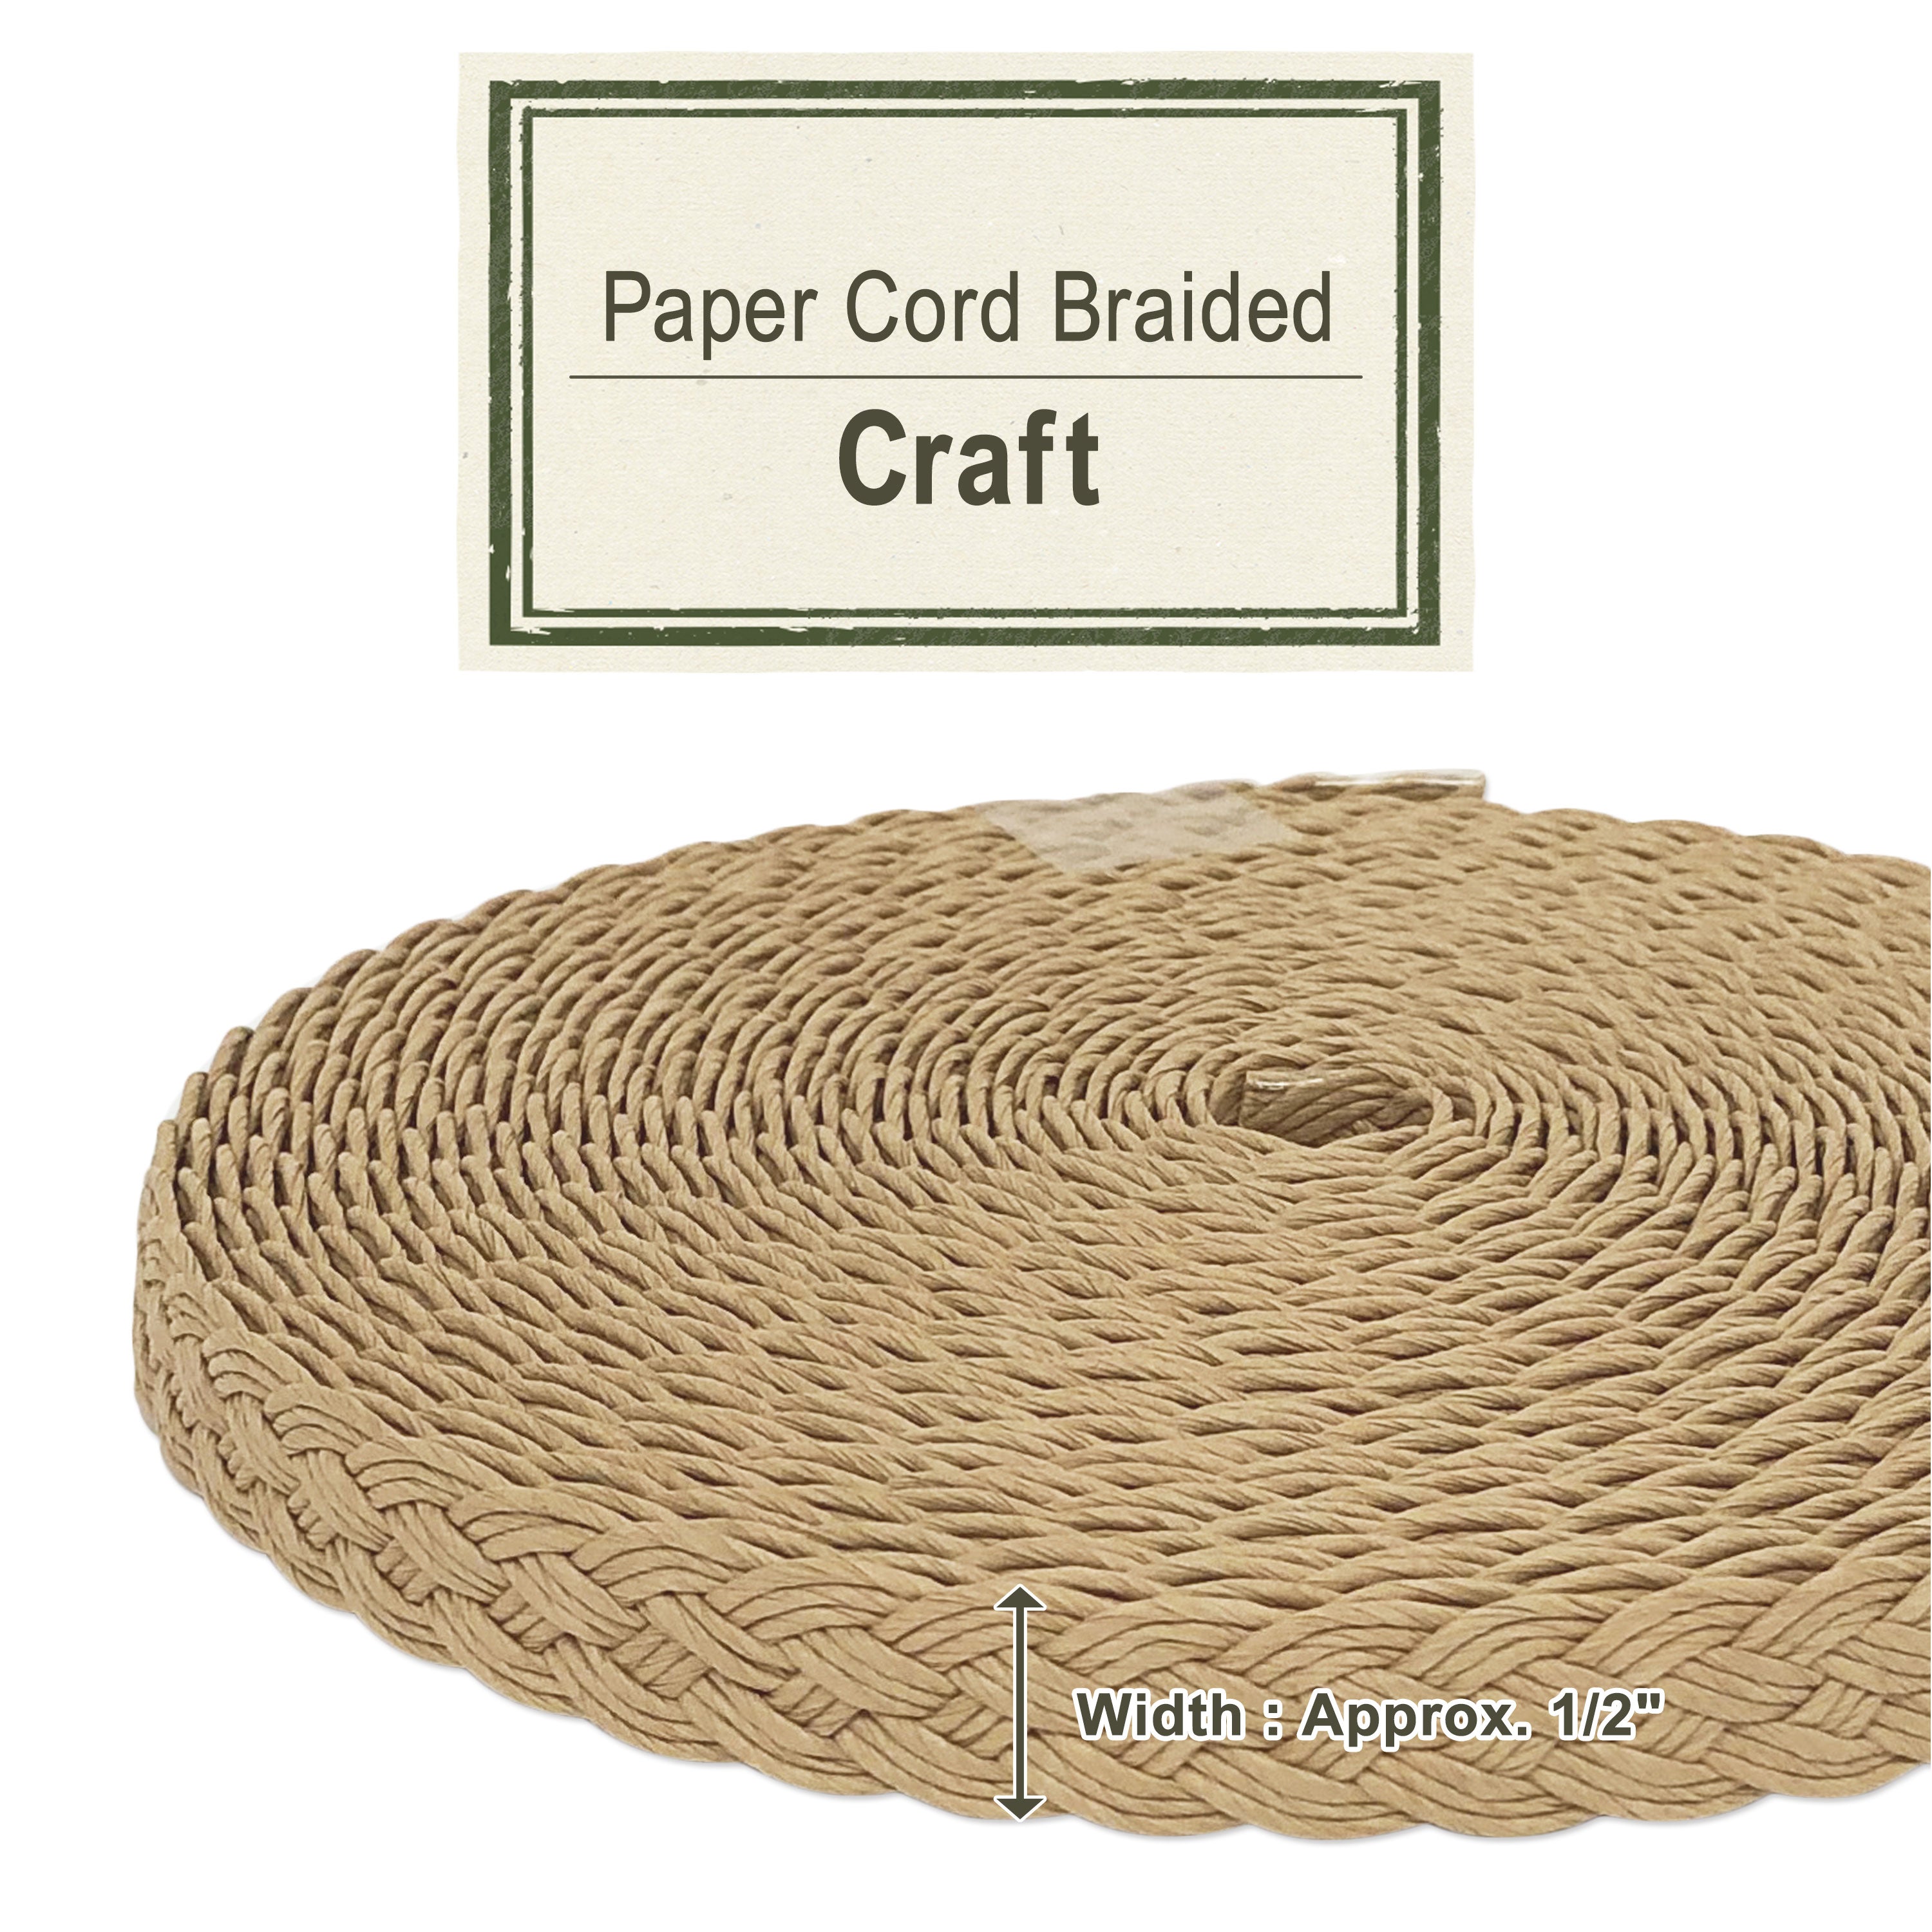 Craft 14mm [Paper Cord Braided]